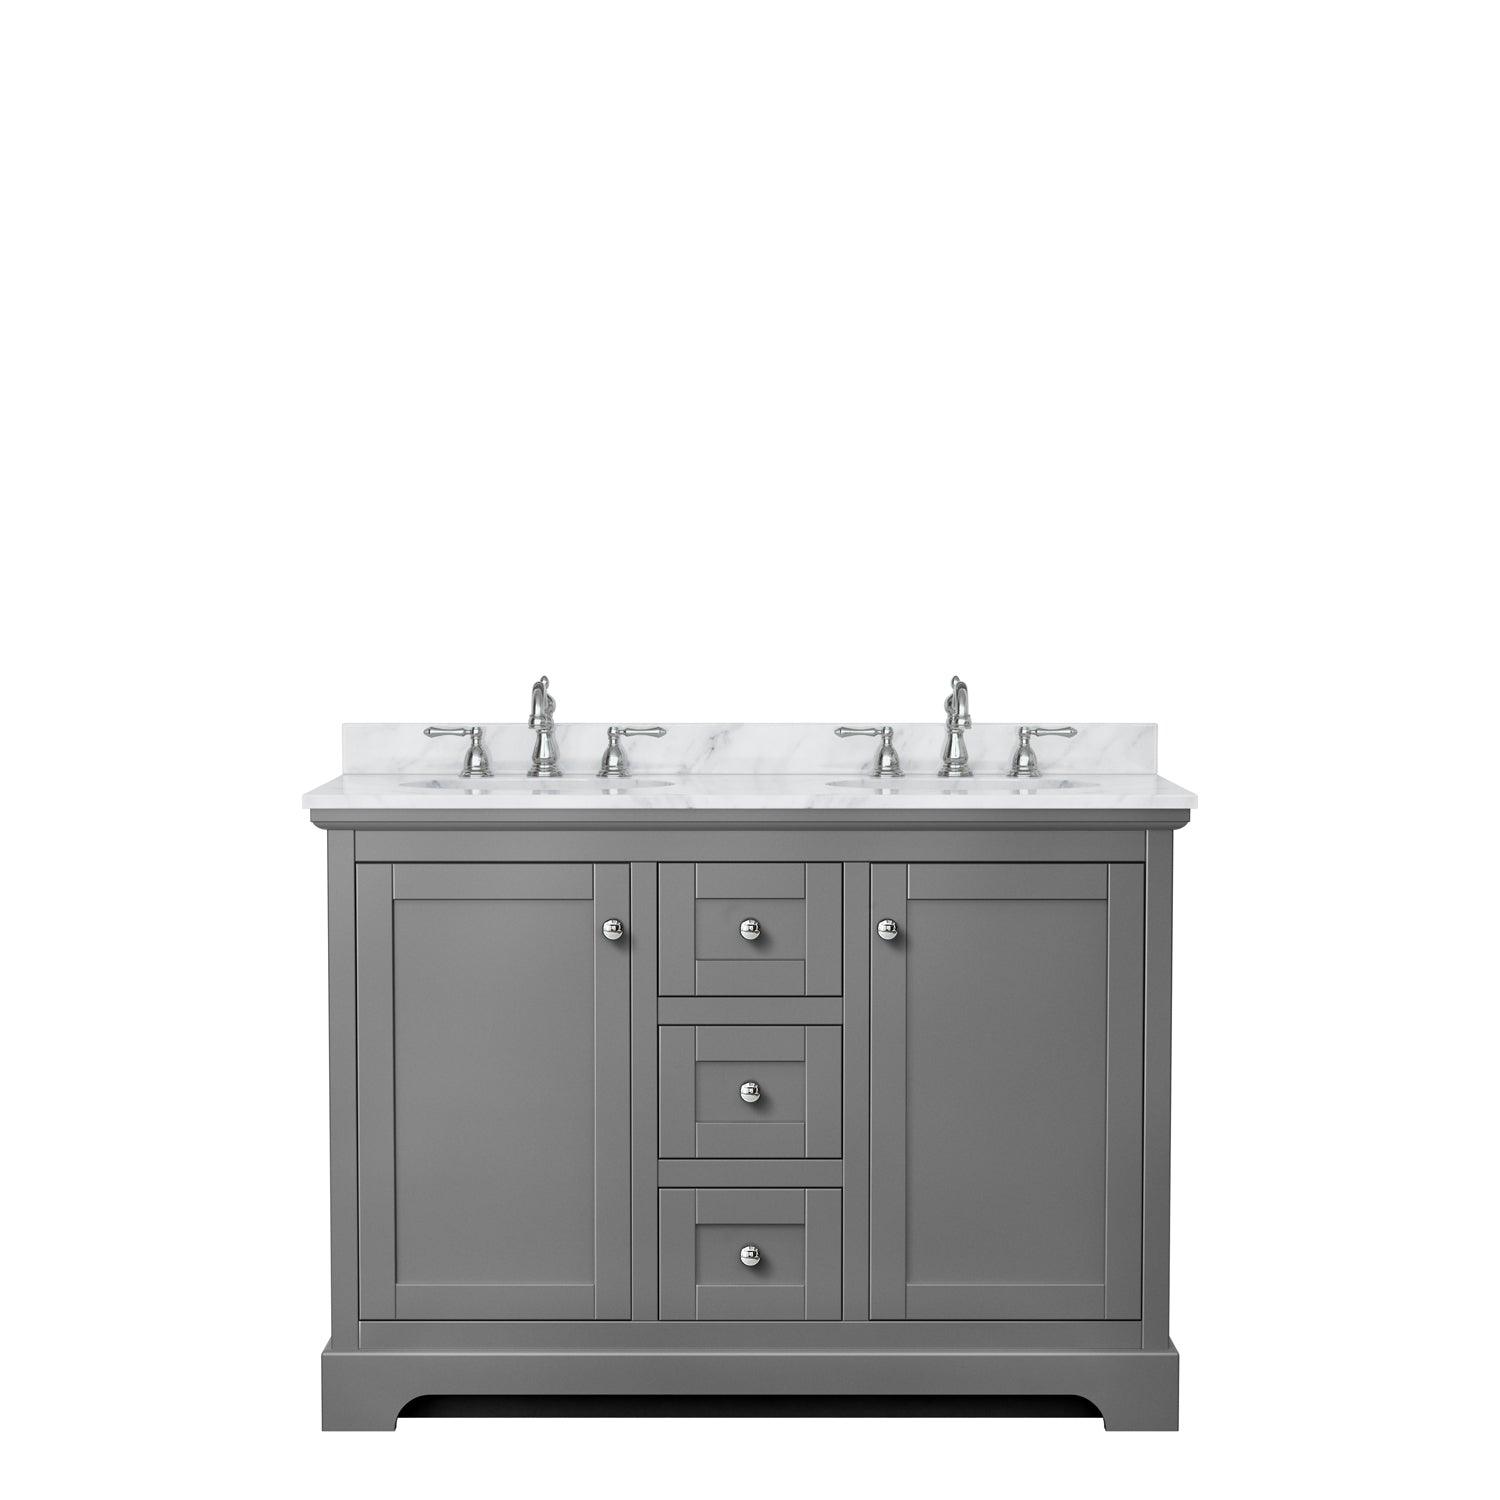 Wyndham Collection Avery Double Bathroom Vanity with White Carrara Marble Countertop, Undermount Oval Sinks, Optional Mirror - Sea & Stone Bath